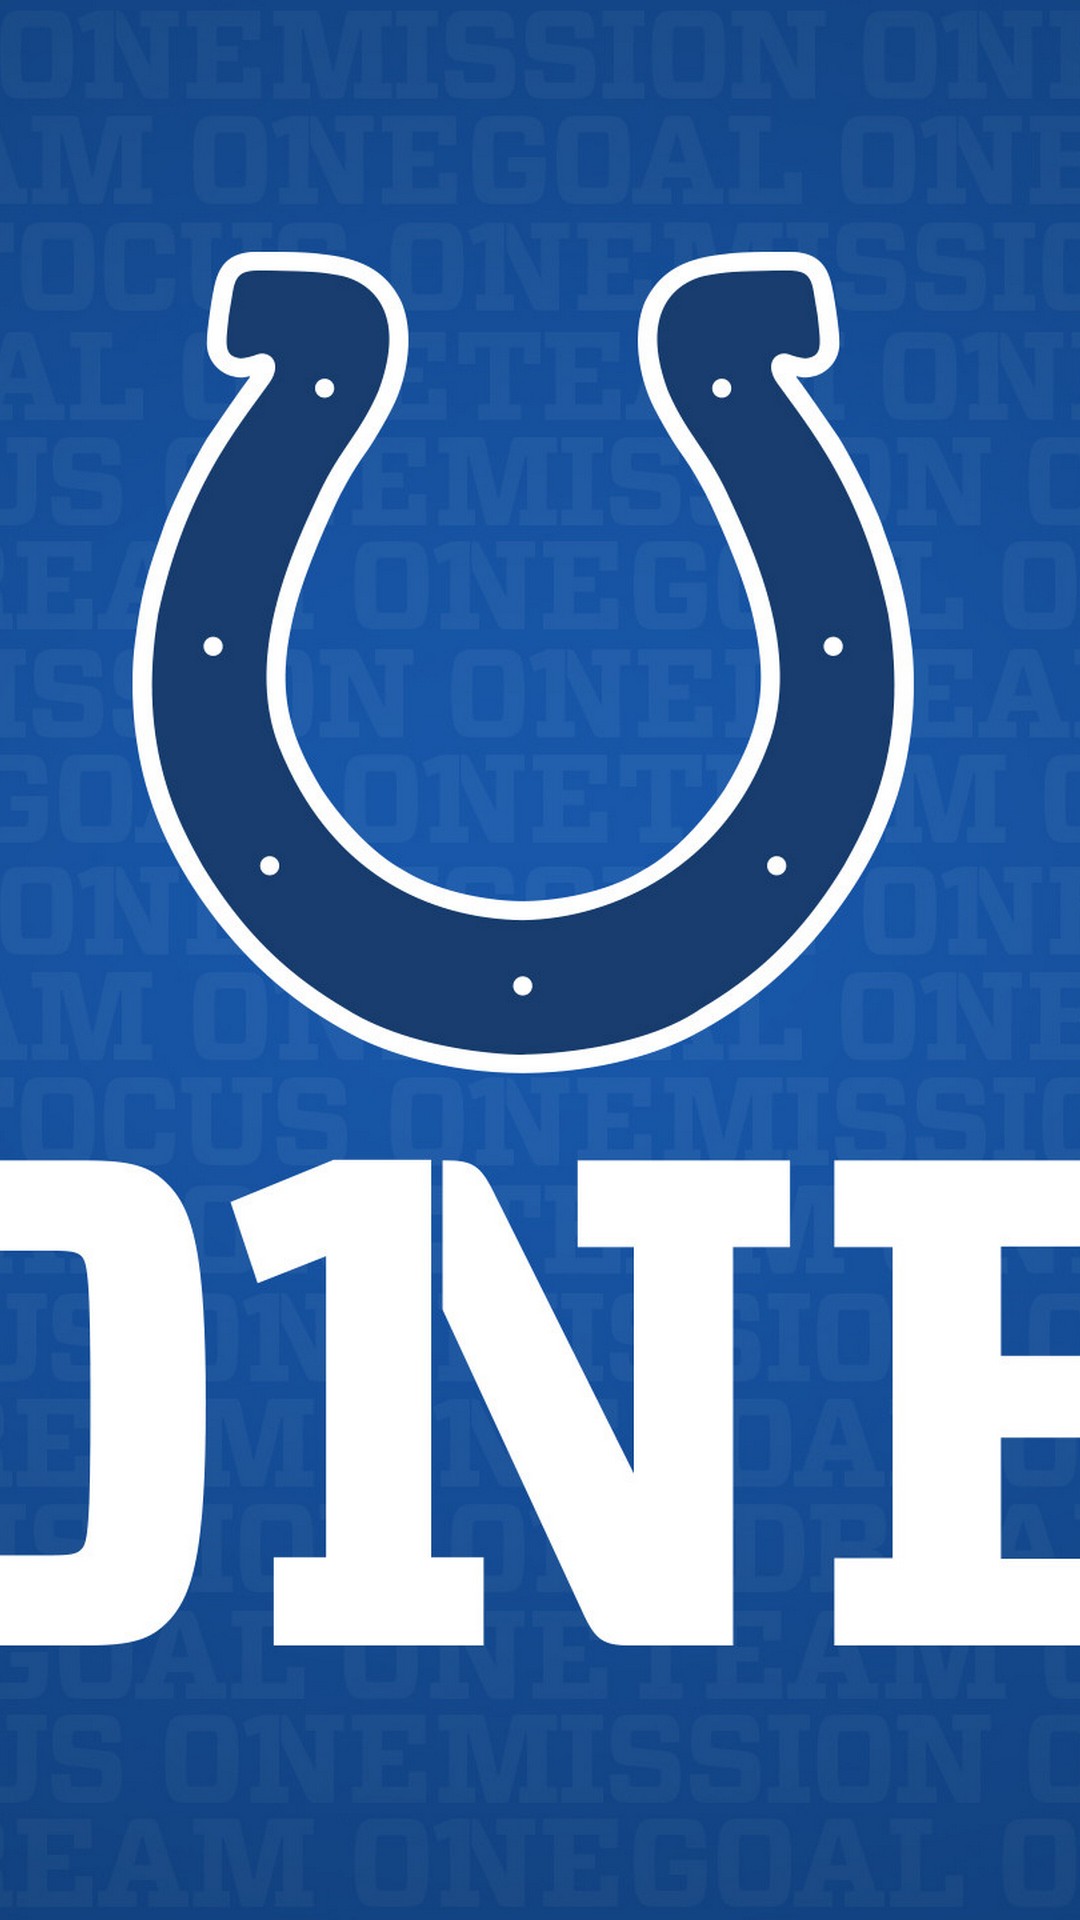 Indianapolis Colts iPhone 6 Plus Wallpaper with high-resolution 1080x1920 pixel. Download and set as wallpaper for Desktop Computer, Apple iPhone X, XS Max, XR, 8, 7, 6, SE, iPad, Android